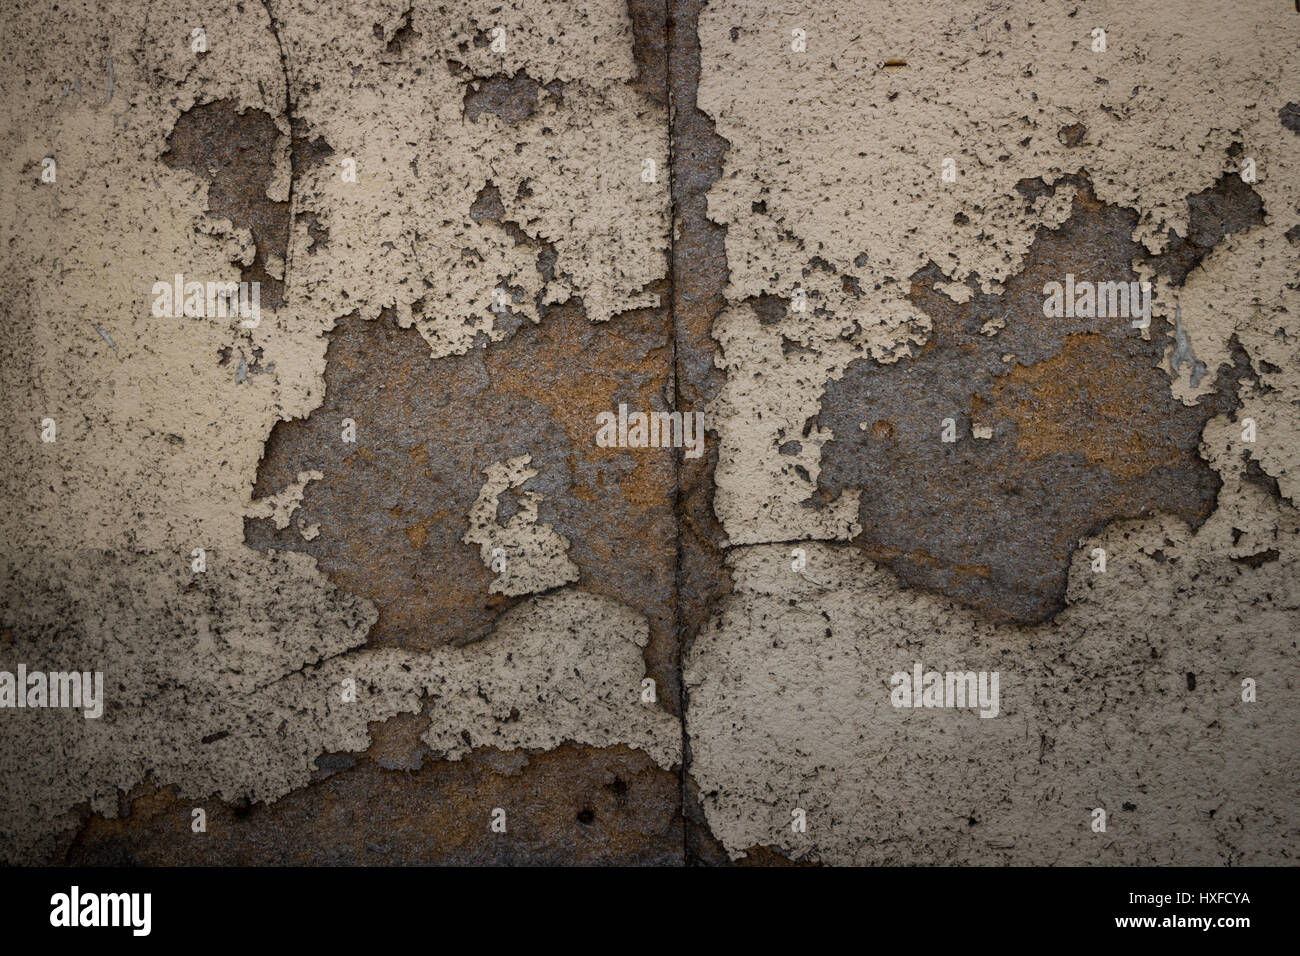 Gritty, urban high-res textures. Useful as an overlay for images in Photoshop. Stock Photo